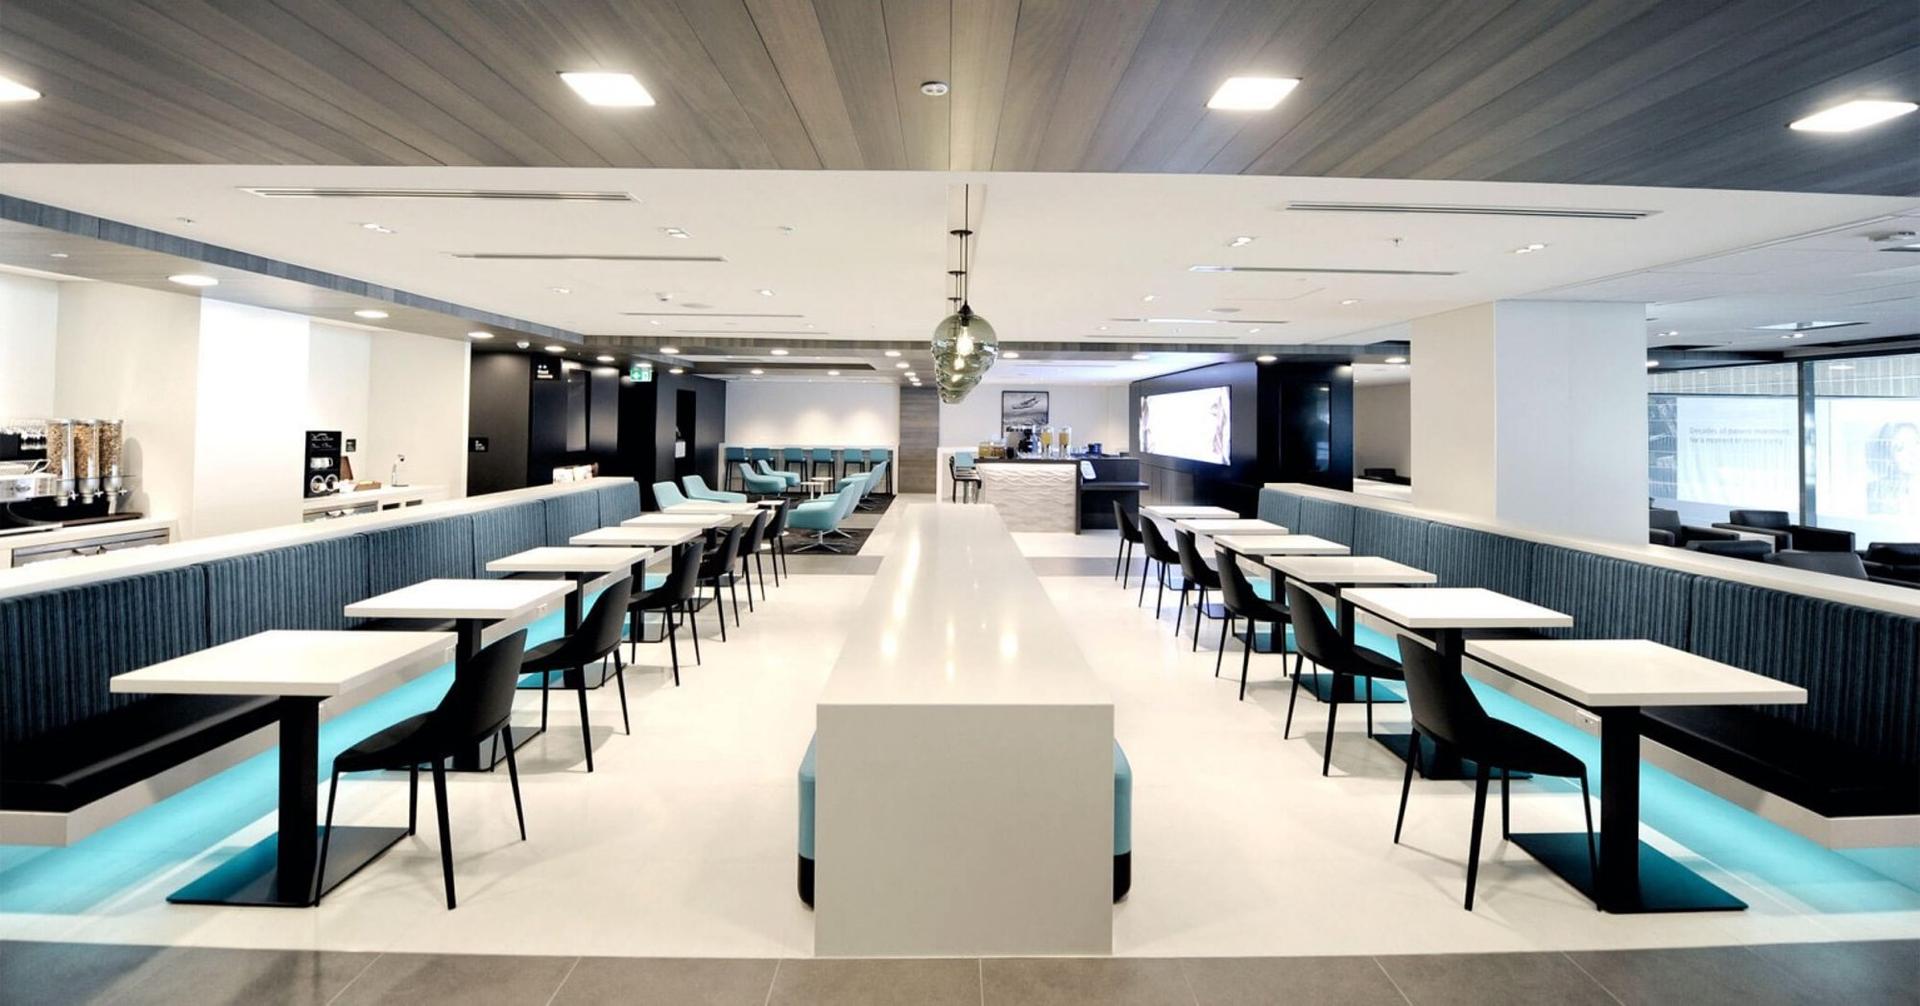 Air New Zealand Regional Lounge image 5 of 8